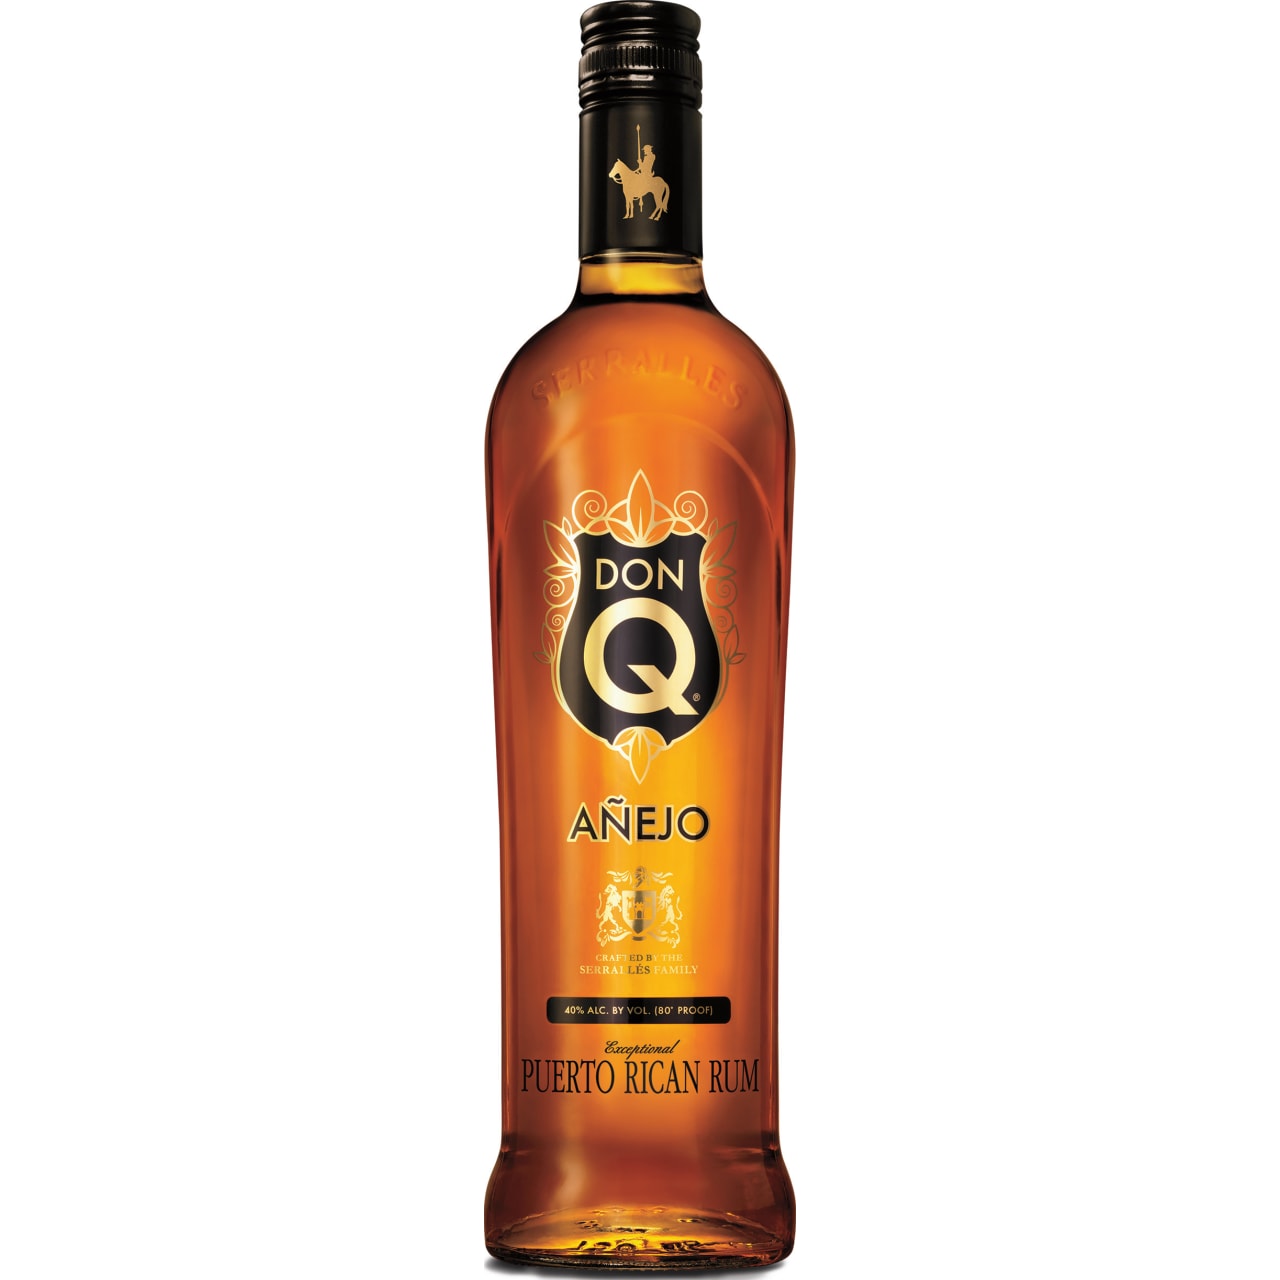 A fantastic example of a rum that has been aged and is dry yet has a sweet profile.